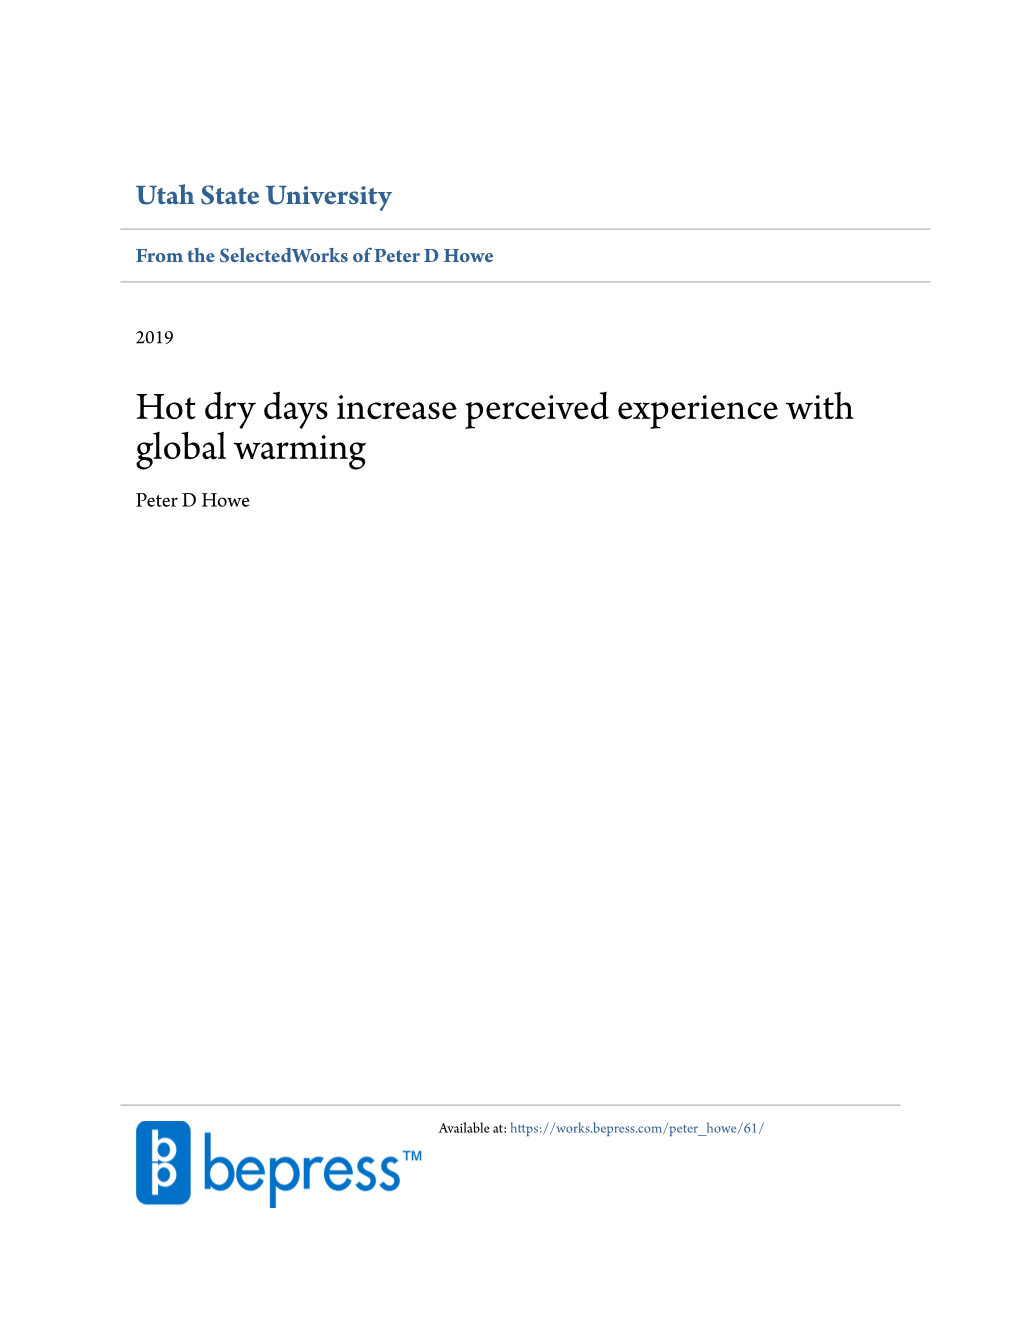 Hot Dry Days Increase Perceived Experience with Global Warming Peter D Howe